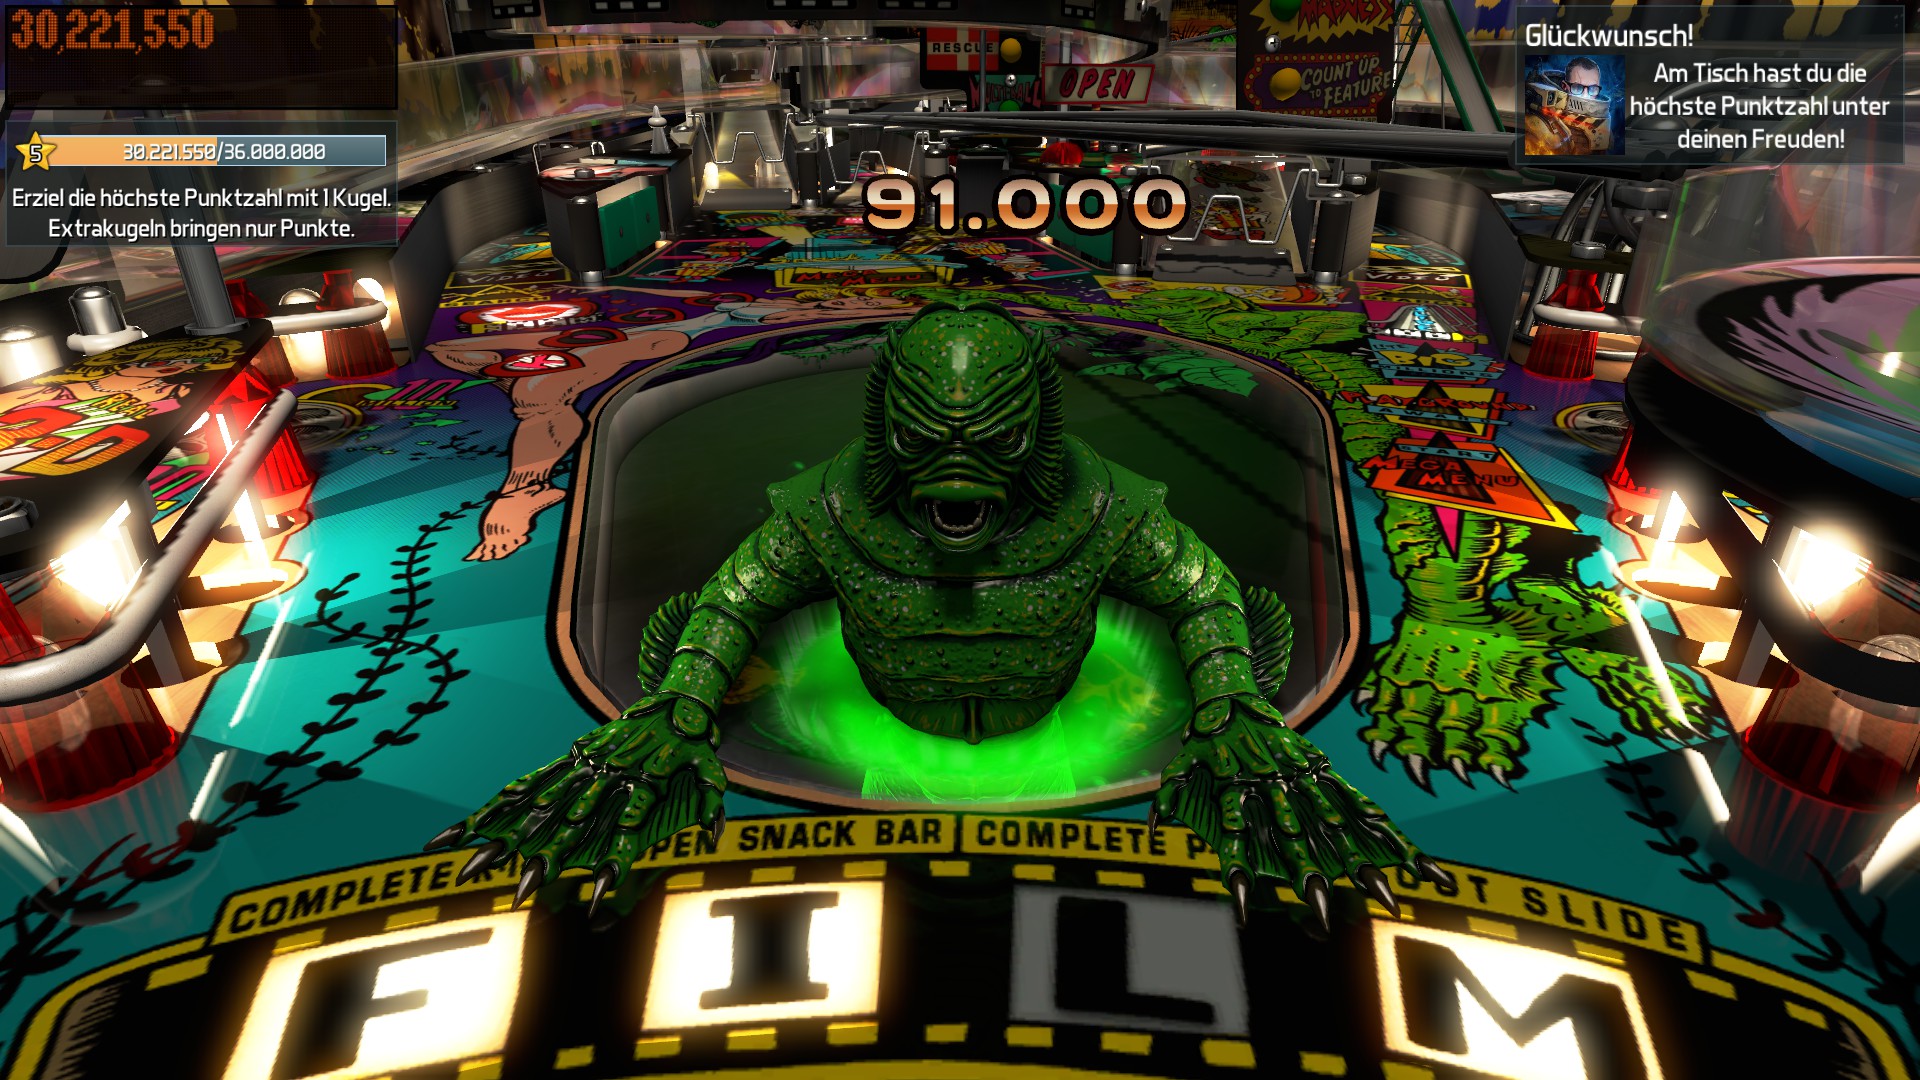 e2e4: Pinball FX3: The Creature From The Black Lagoon [1 Ball Challenge] (PC) 30,221,550 points on 2022-05-19 20:01:32